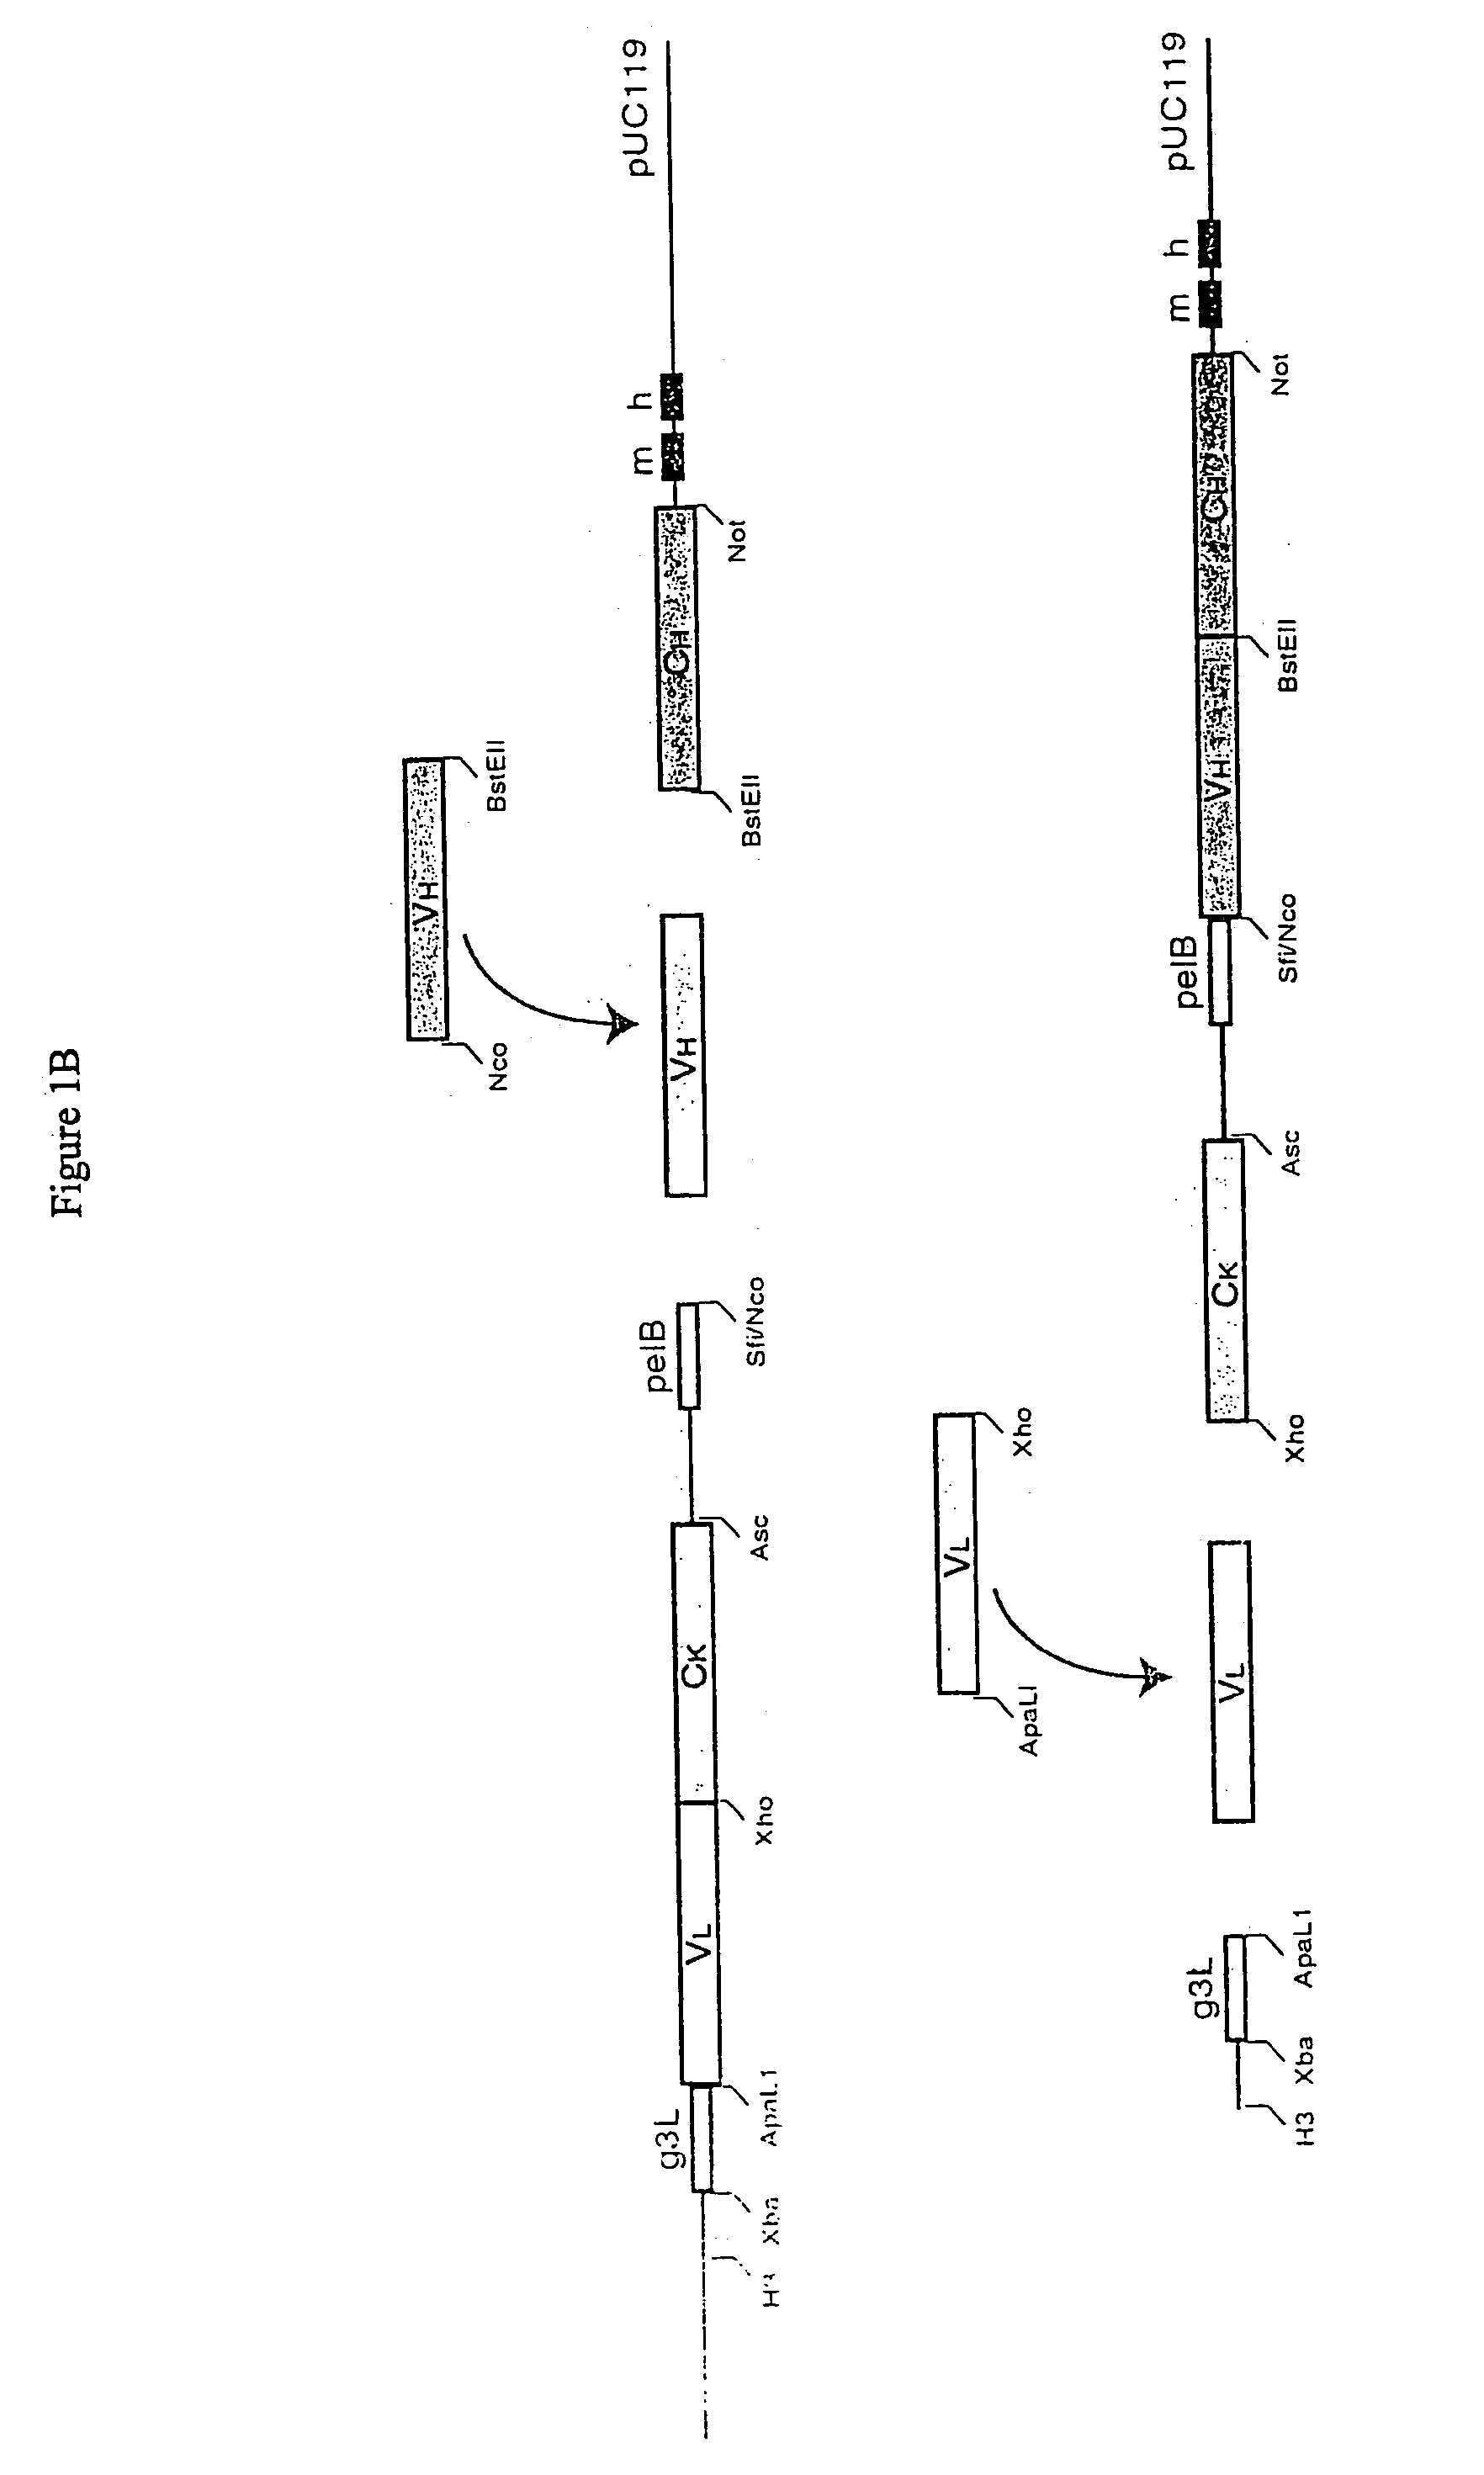 Methods and reagents for identifying rare fetal cells in the maternal circulation